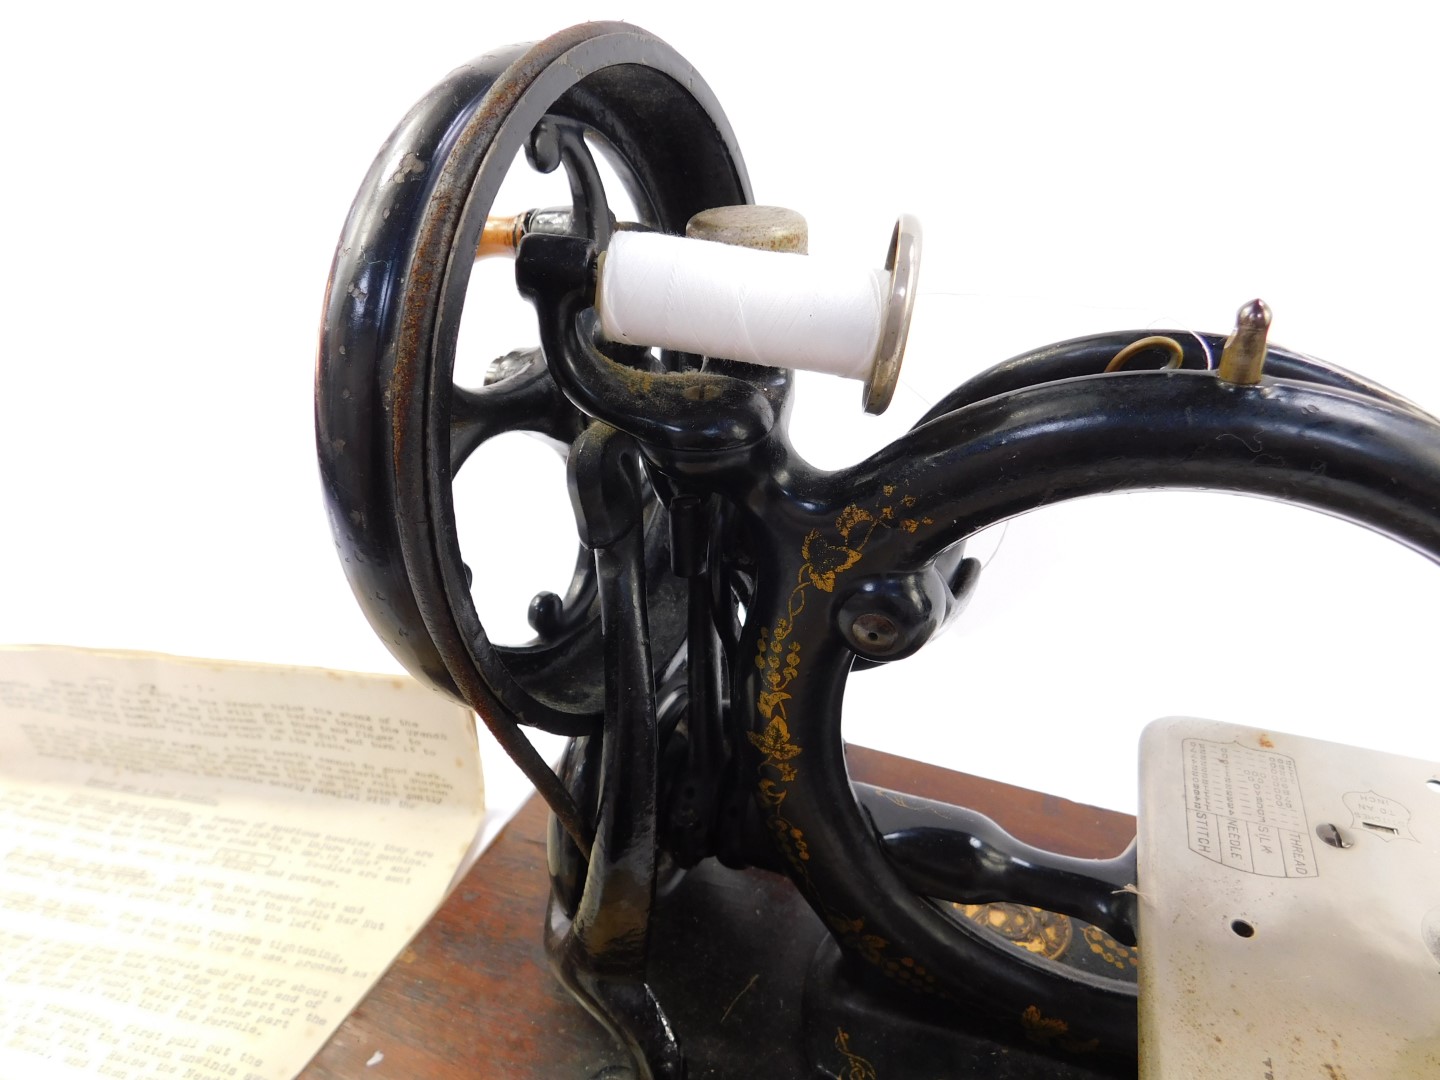 A late 19thC Wilcox & Gibbs sewing machine, gilt decorated black metal on a wooden base, together - Image 2 of 4